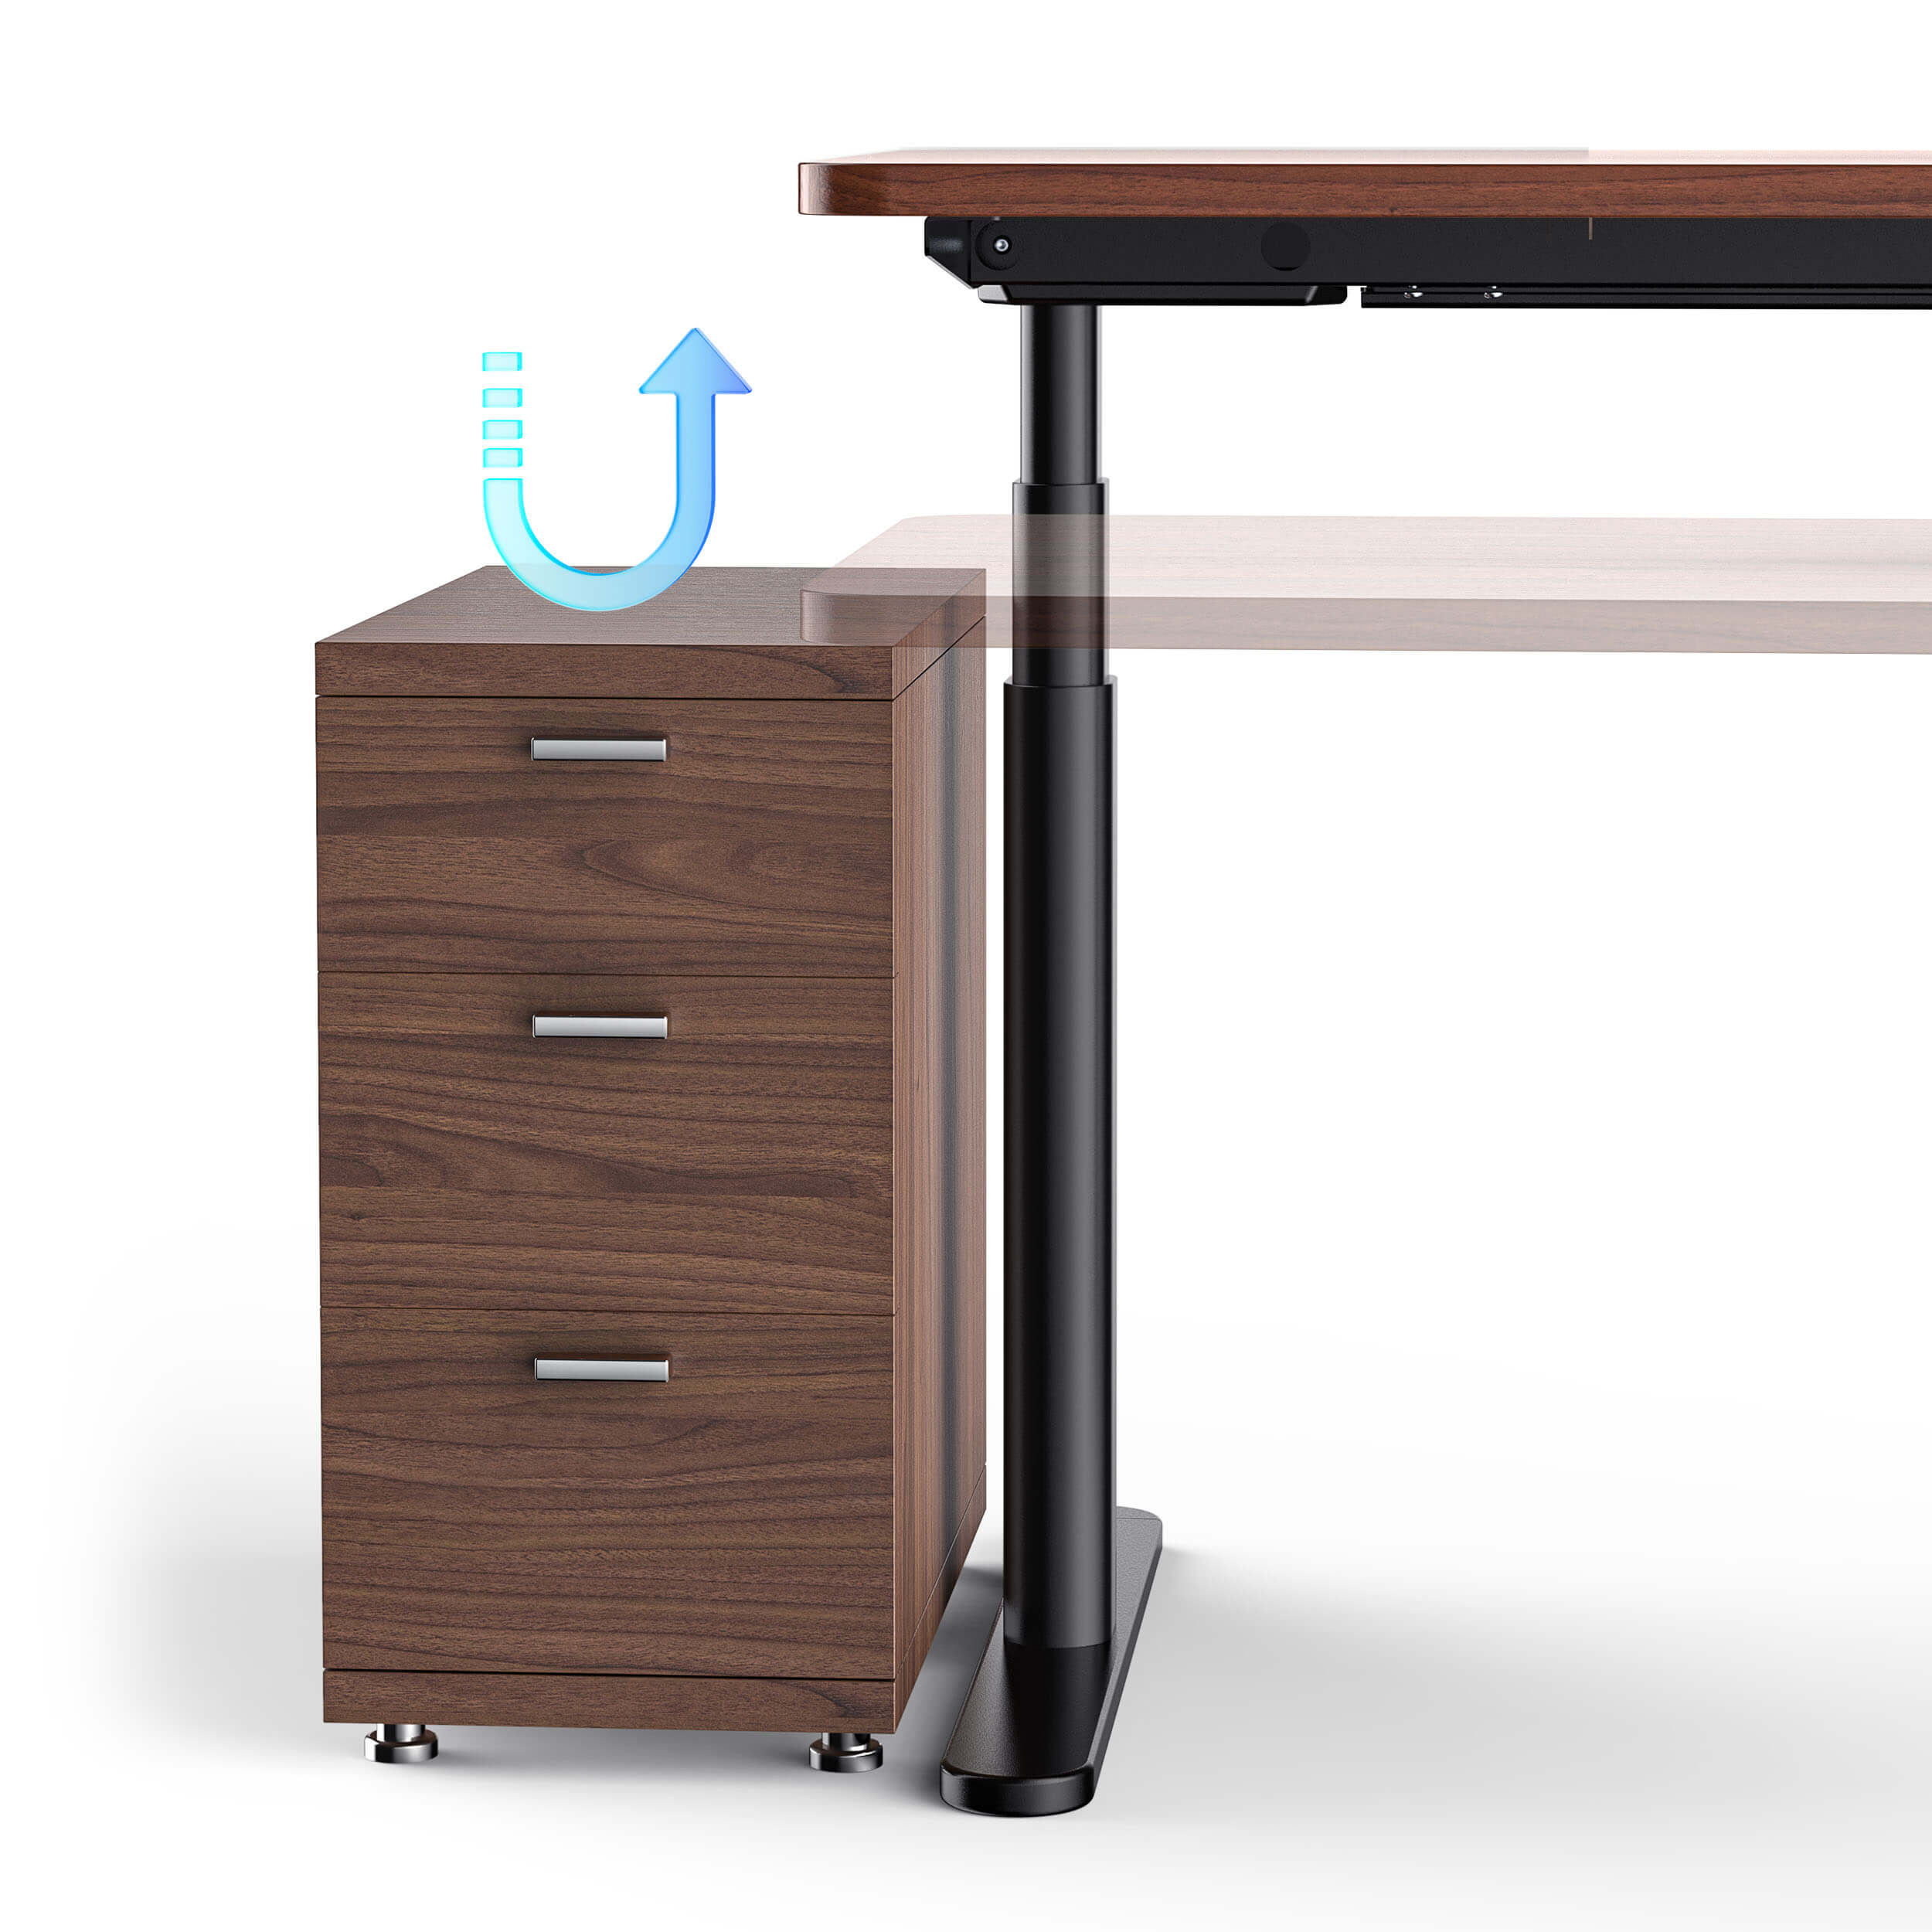 TH2 Pro Plus oval standing desk leg-comes with built in anti collision to protects furniture